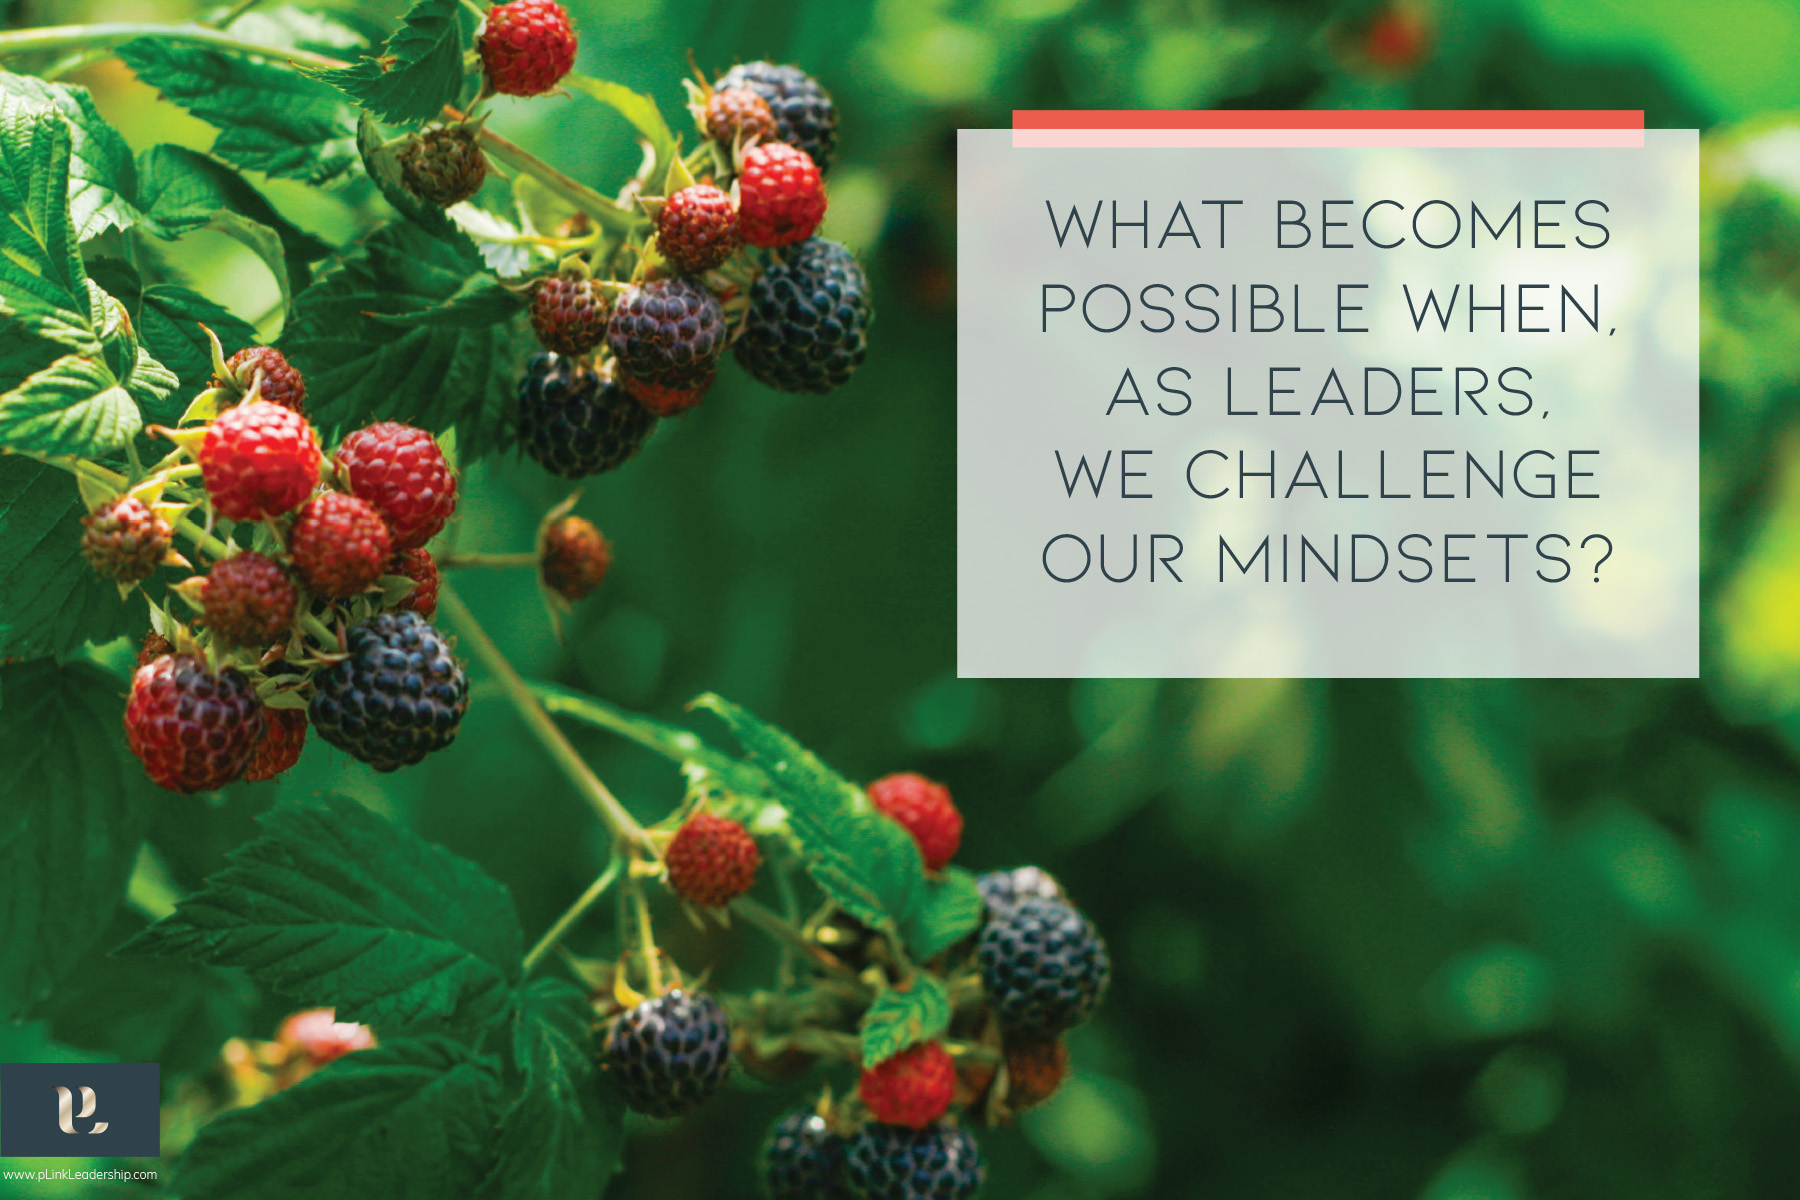 What becomes possible when, as leaders, we challenge our mindsets?